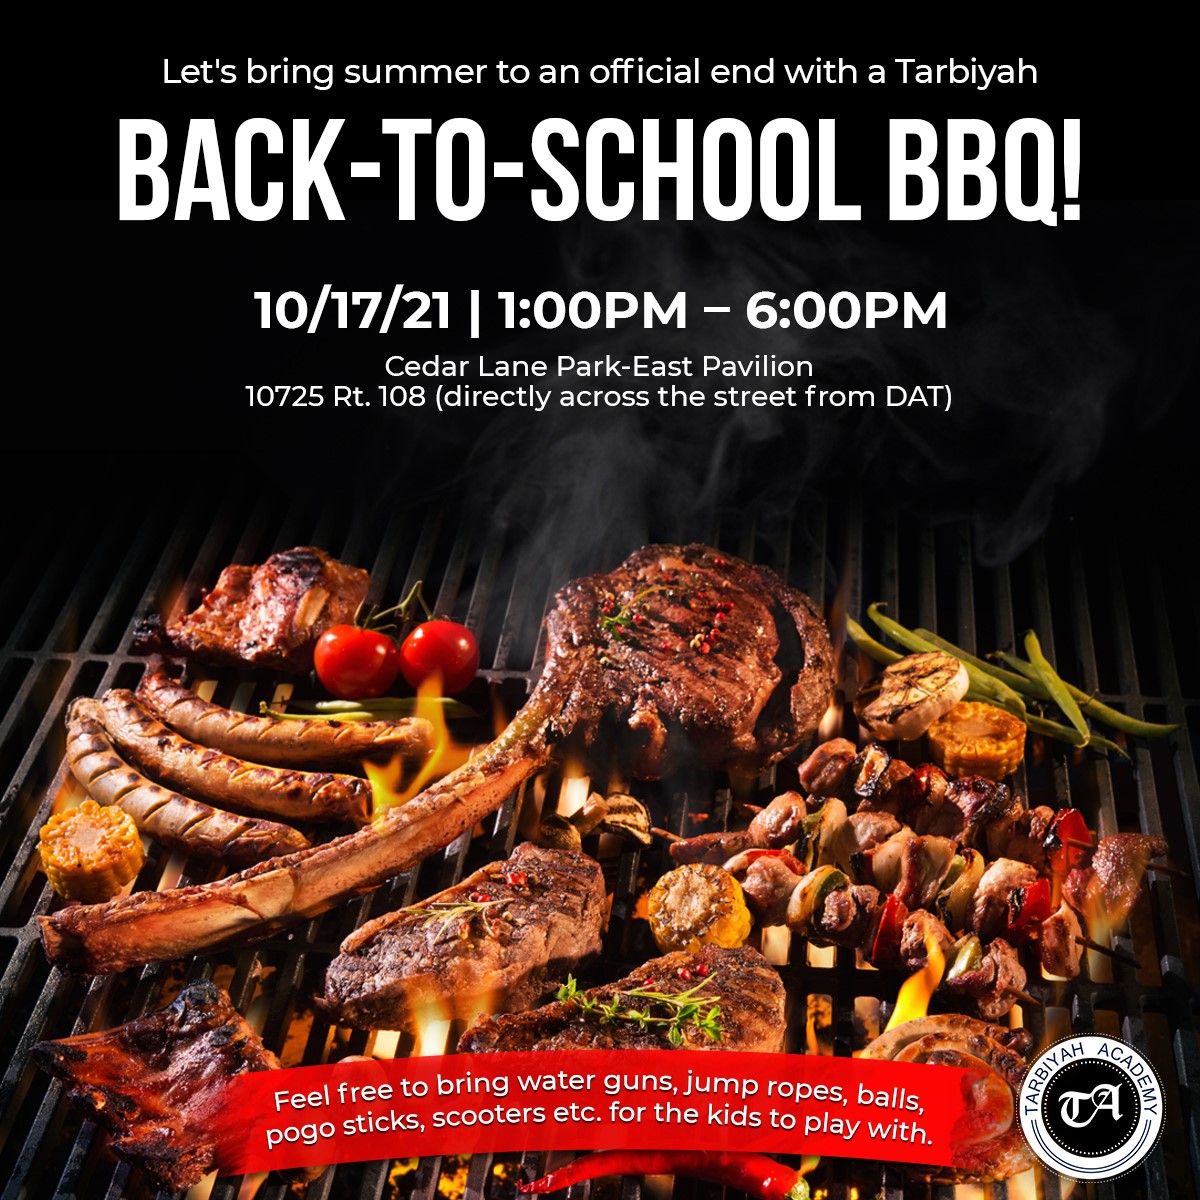 [Image Description: Back To School BBQ Flyer - various meats and vegetables on the grill